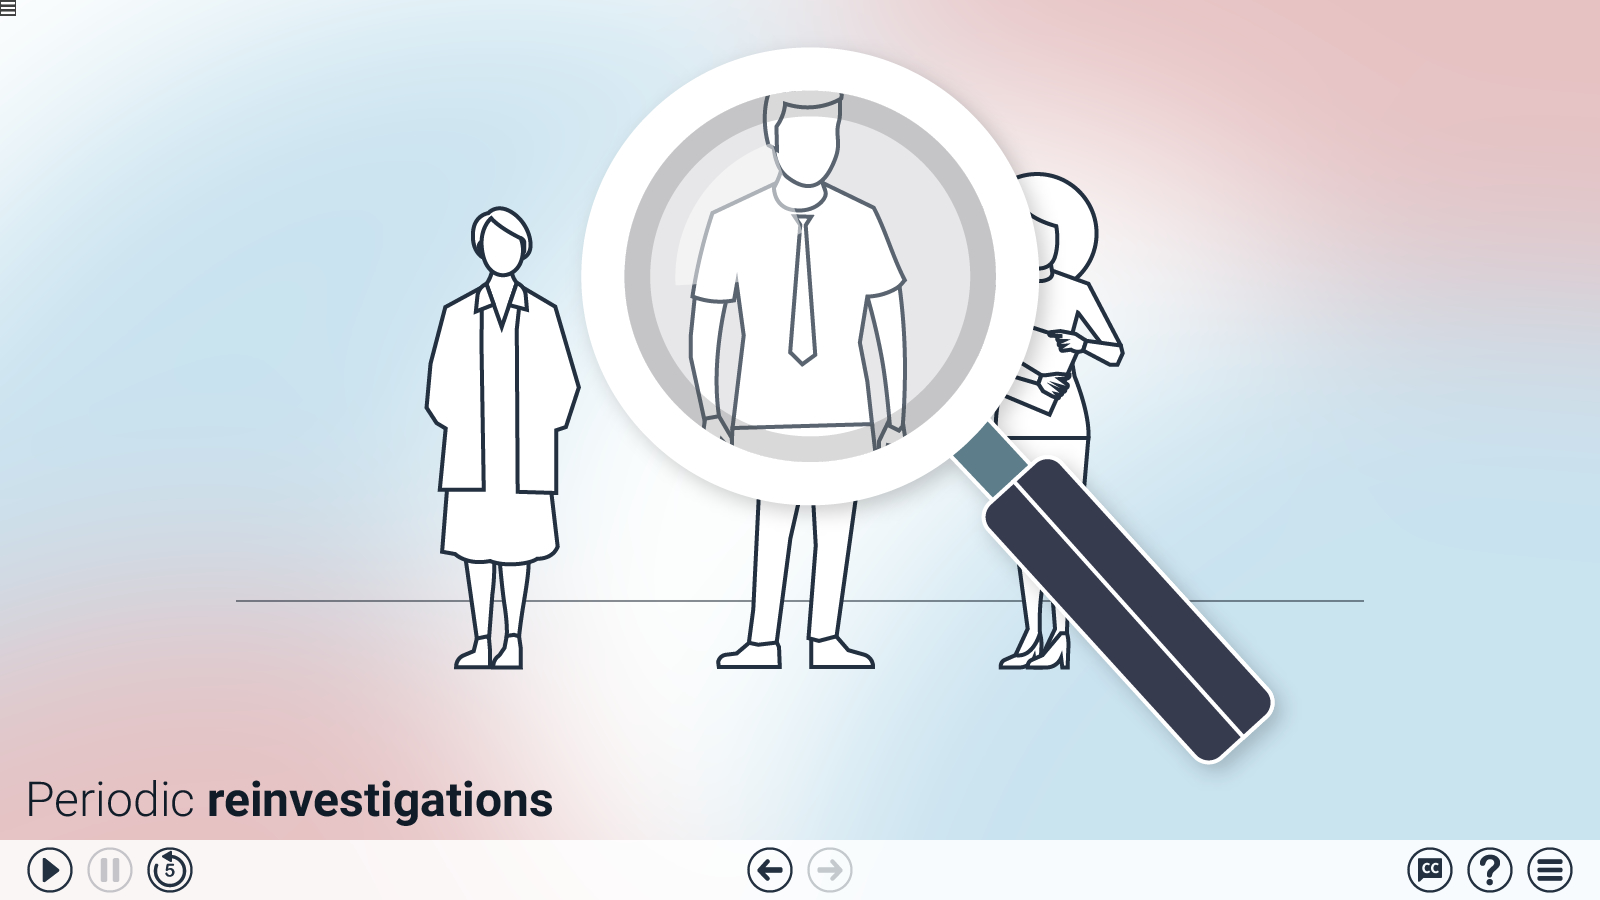 a slide illustrating how staff may need periodic reinvestigations